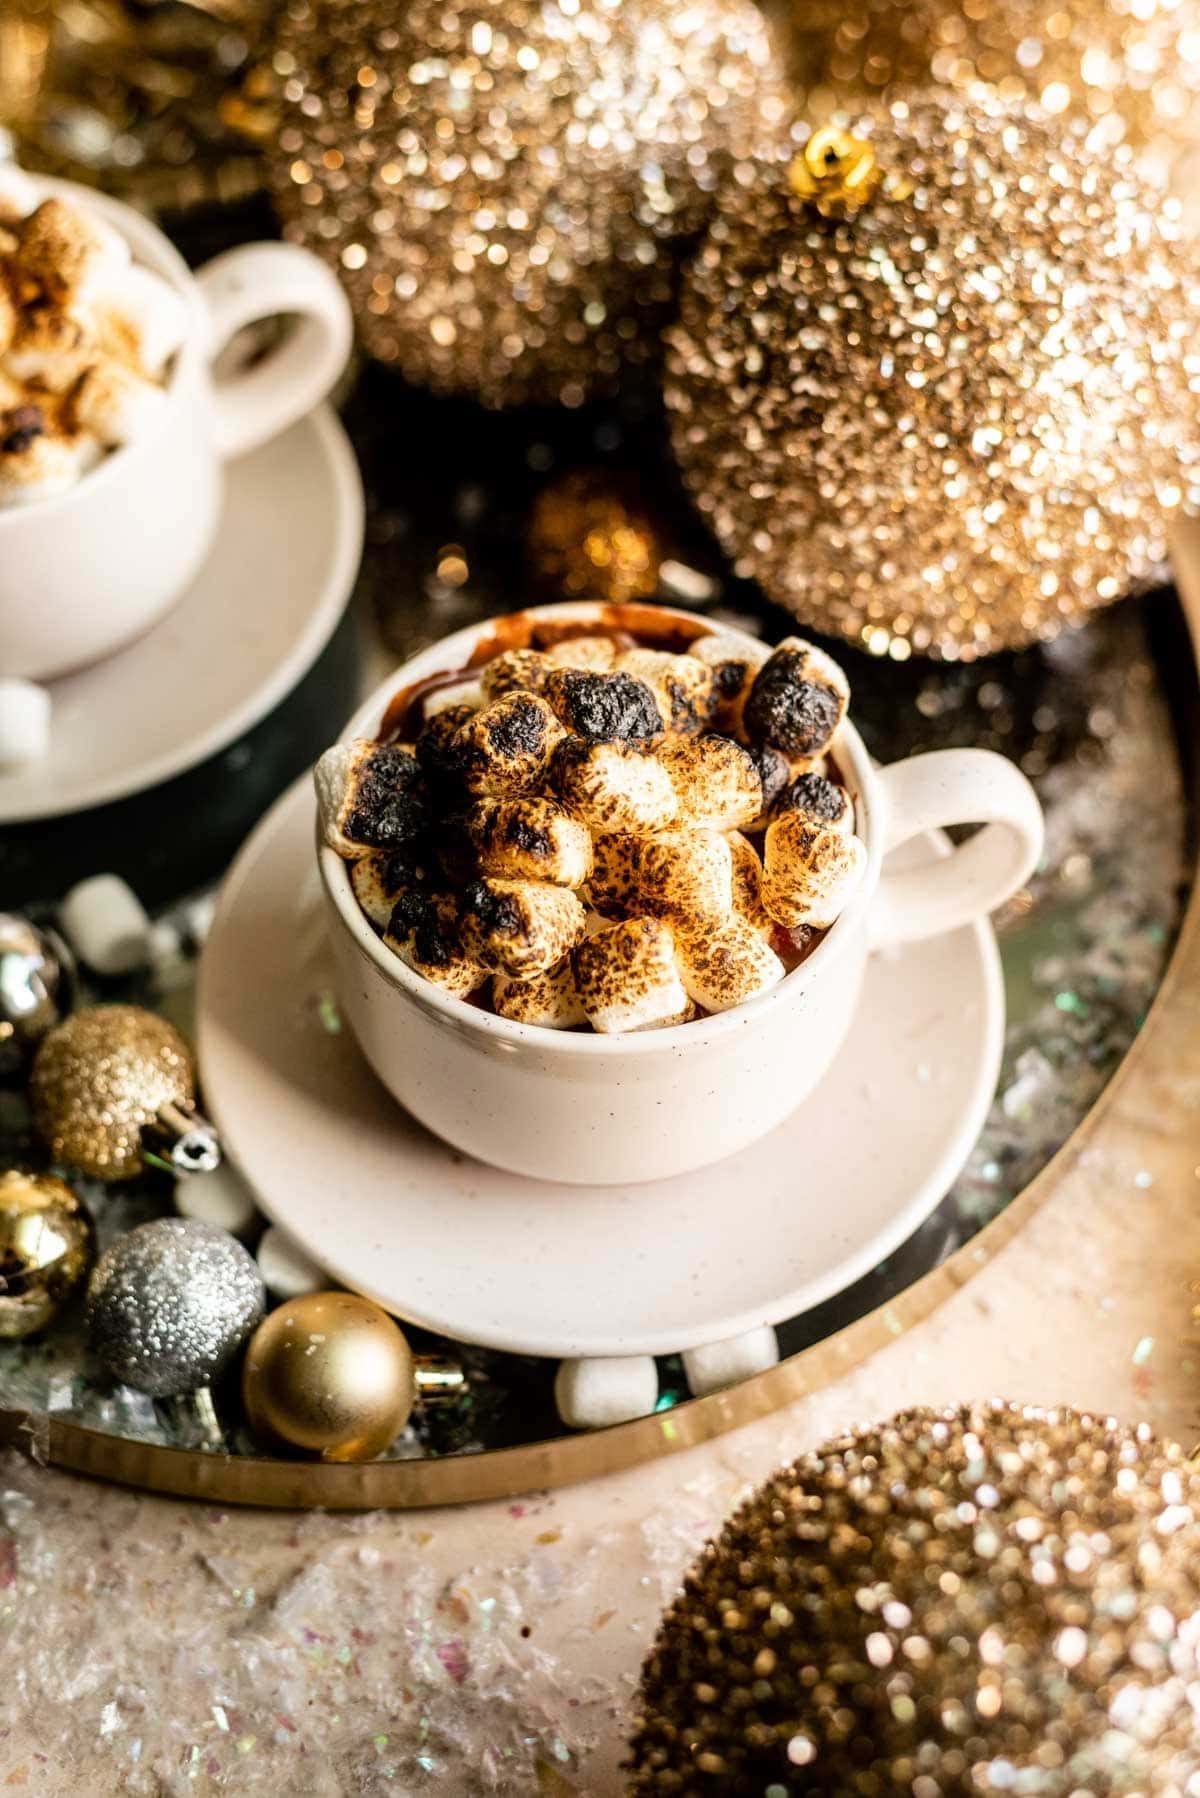 Drink in white mug topped with torched marshmallows on a festive table.